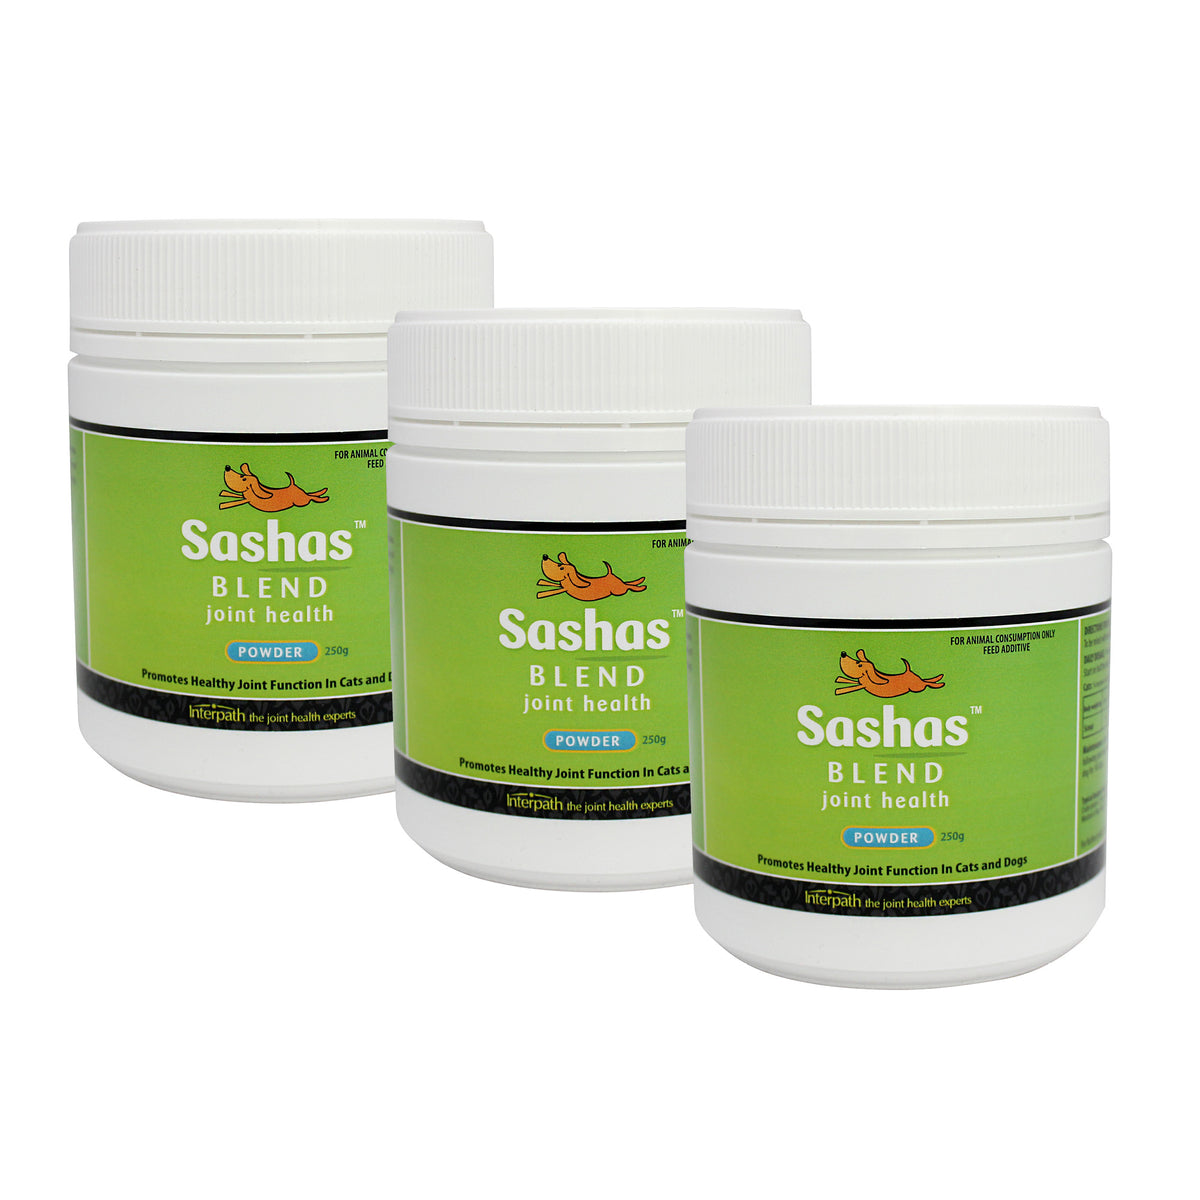 Sashas Blend Joint Powder for Dogs and Cats Value Bundle